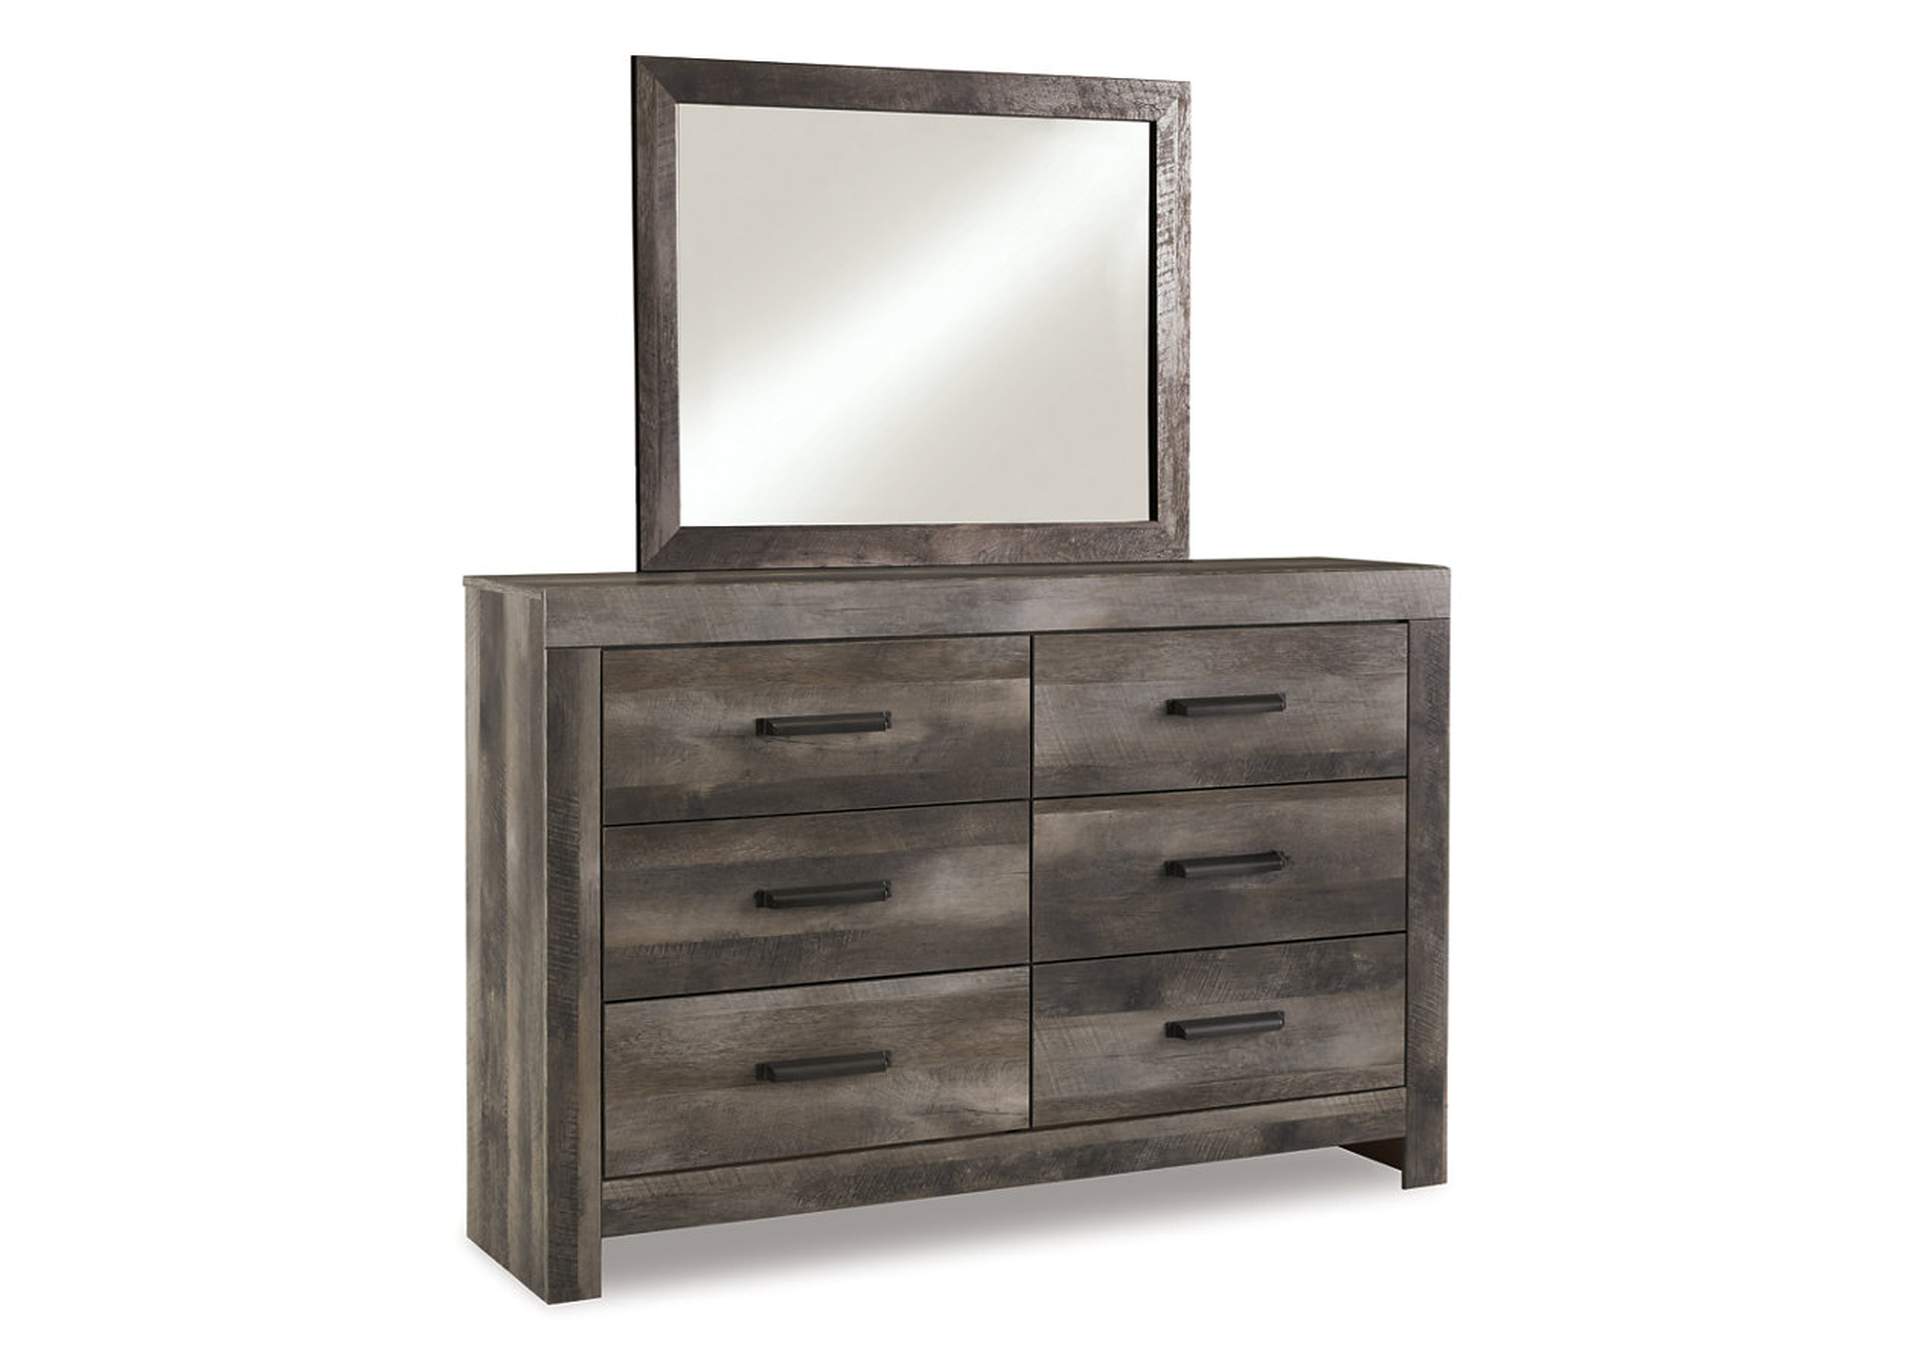 Wynnlow Queen Panel Bed with Mirrored Dresser, Chest and Nightstand,Signature Design By Ashley